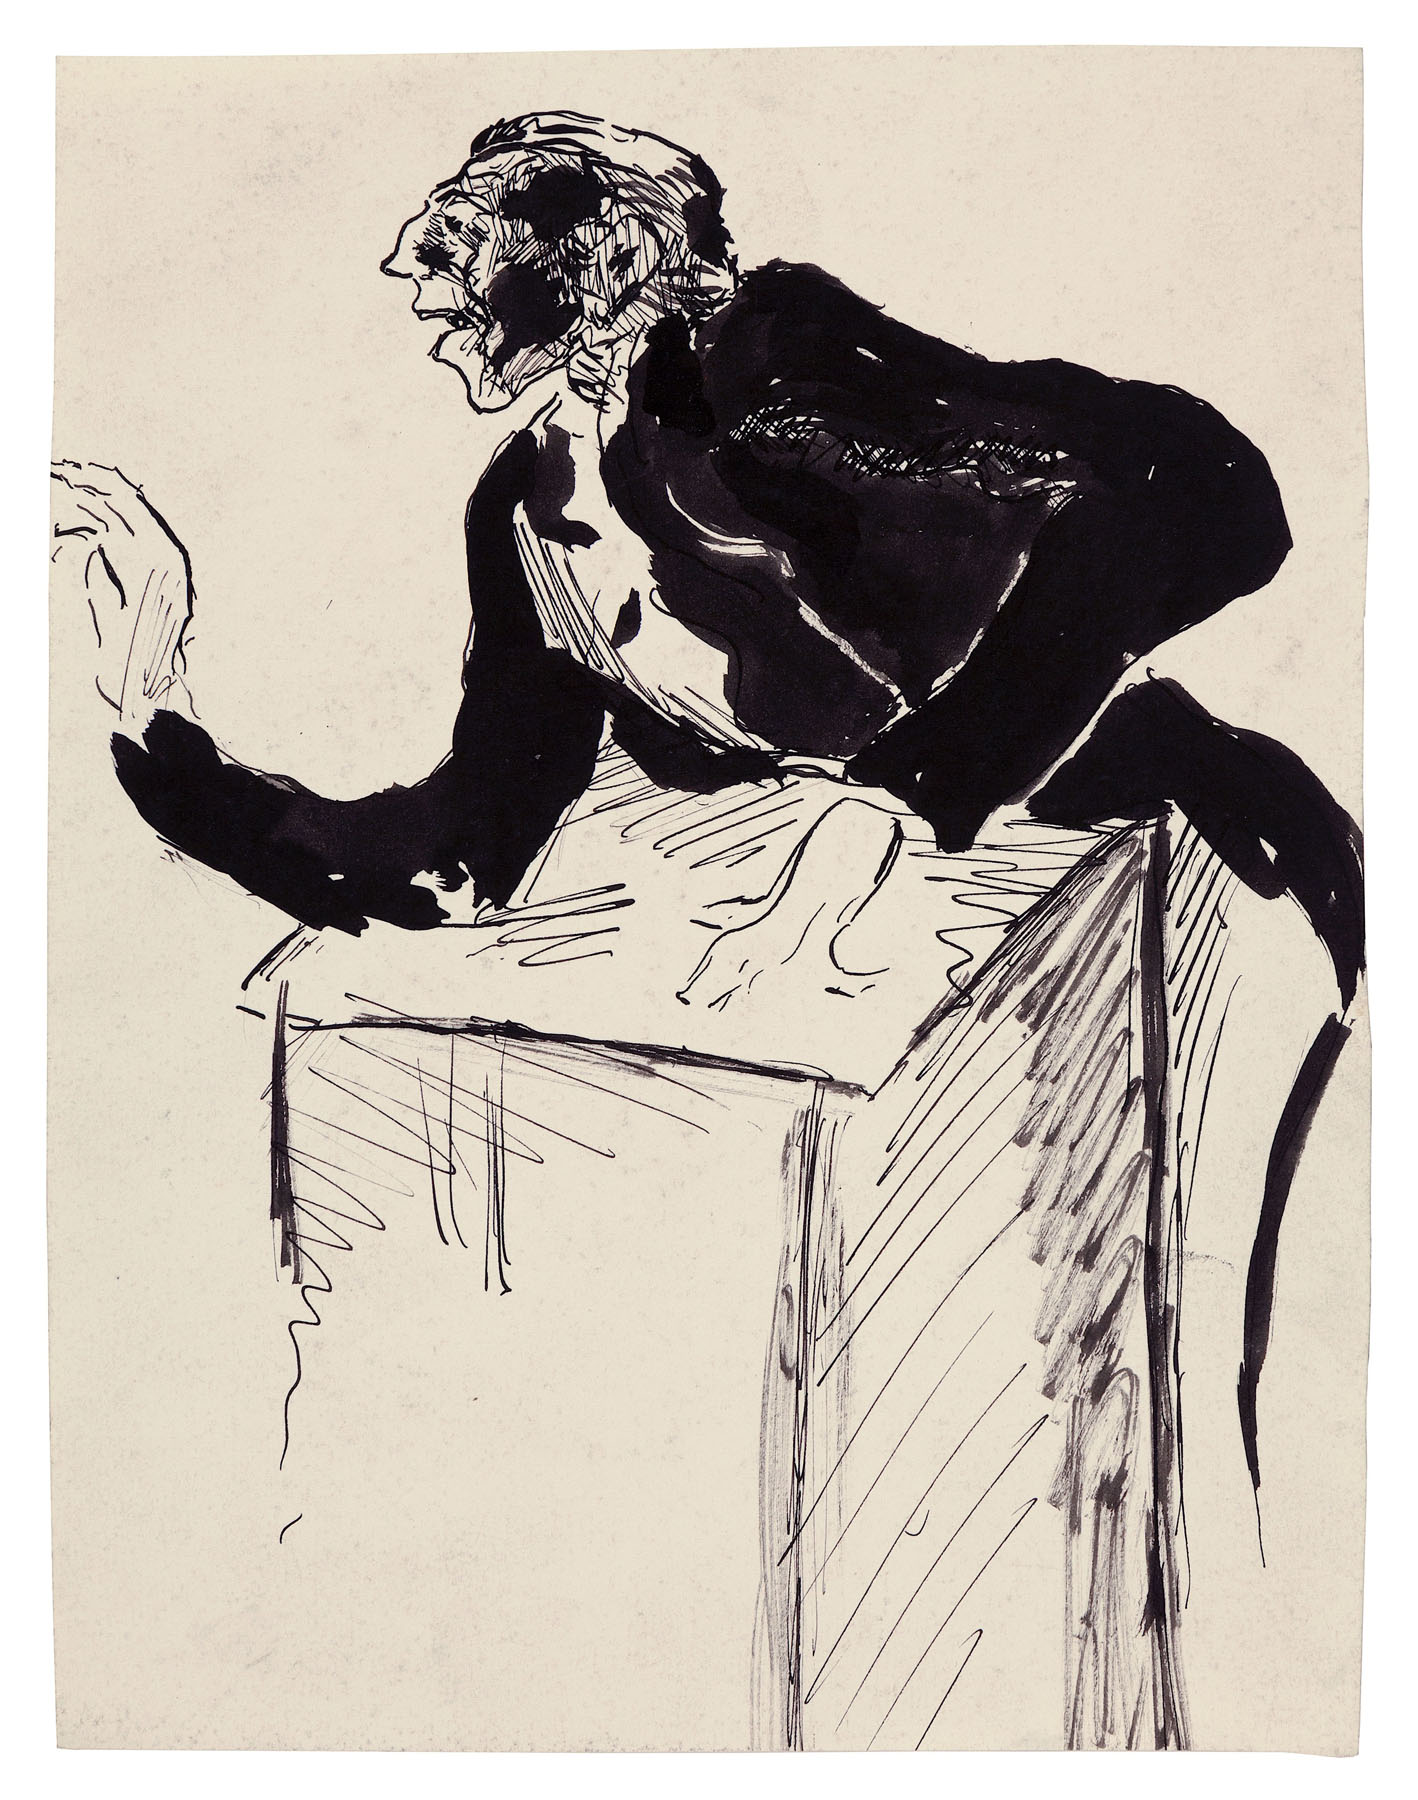 Fritz Ascher, Conductor, c. 1913. Black ink on paper, 10.2 x 7.8 in. (25.8 x 19.8 cm). Collection Nicole Trau. Photo Malcolm Varon ©Bianca Stock